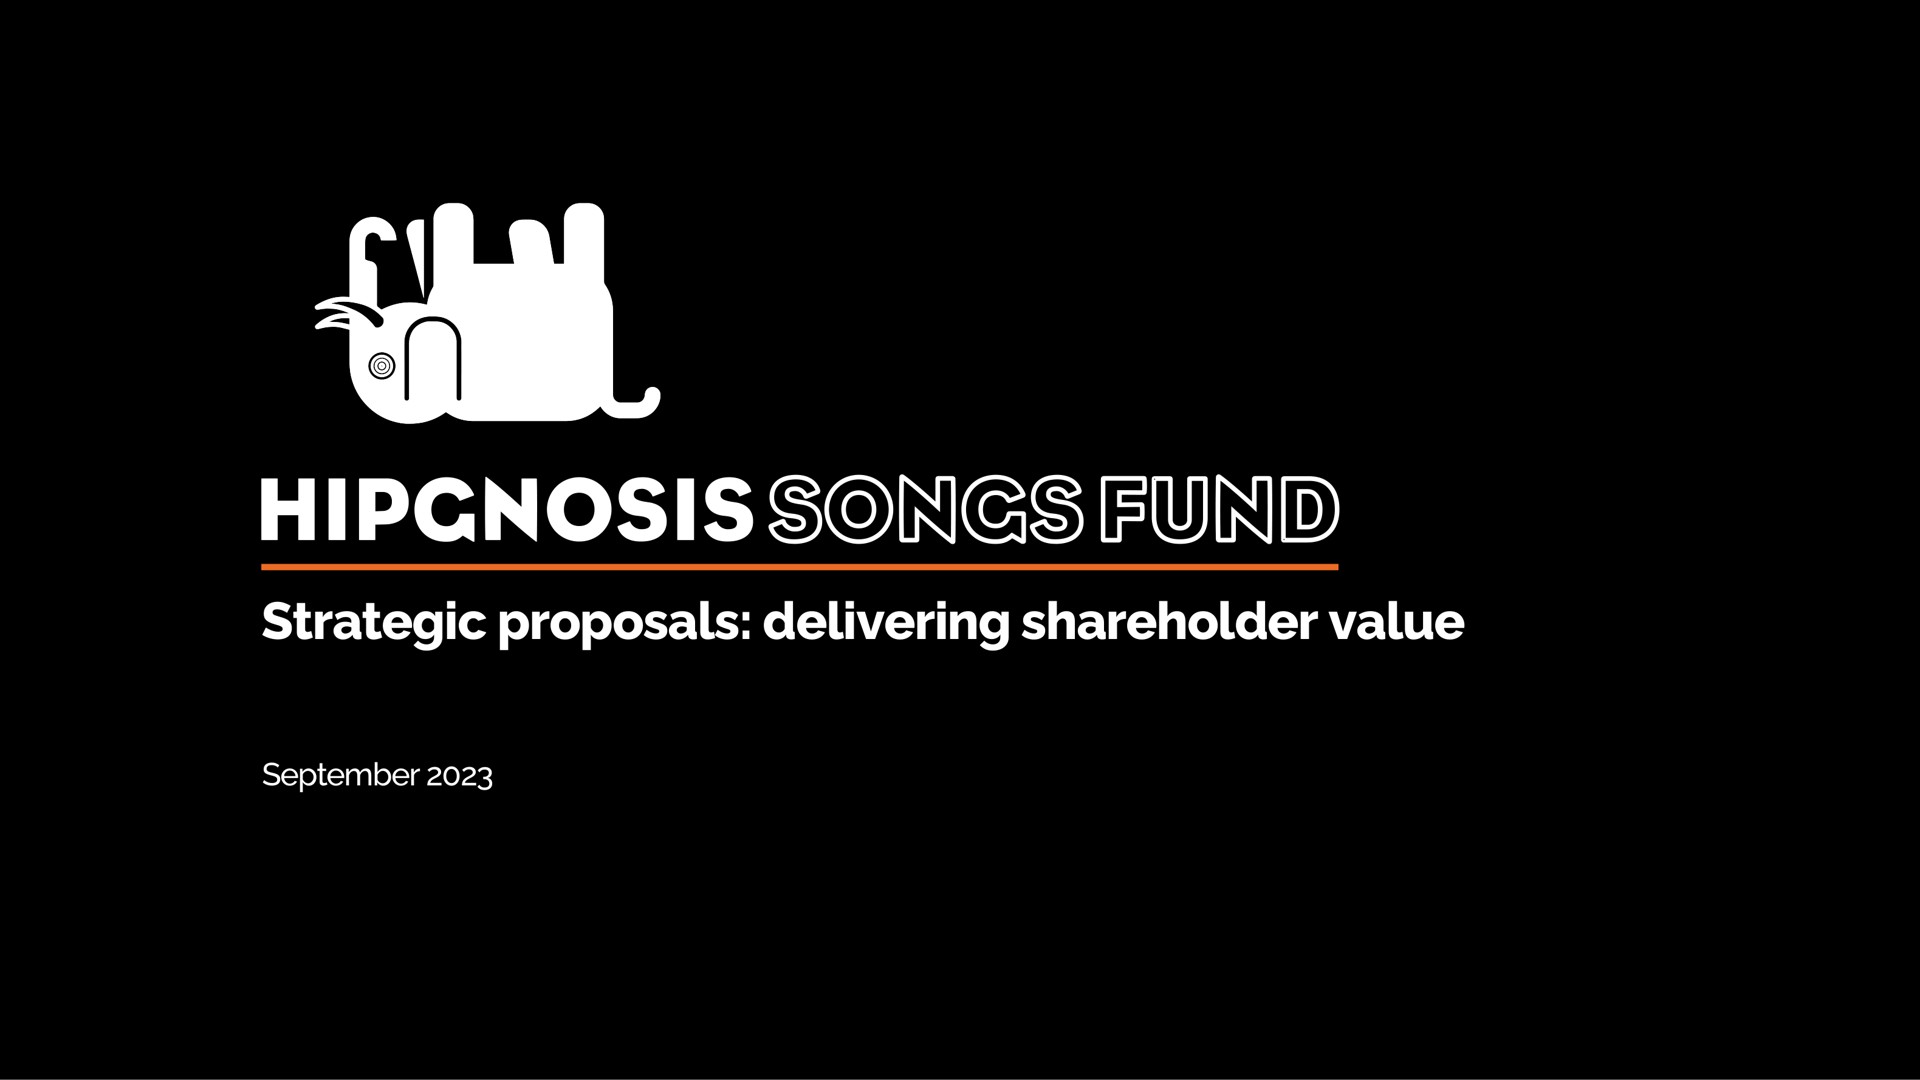 of songs fund | Hipgnosis Songs Fund